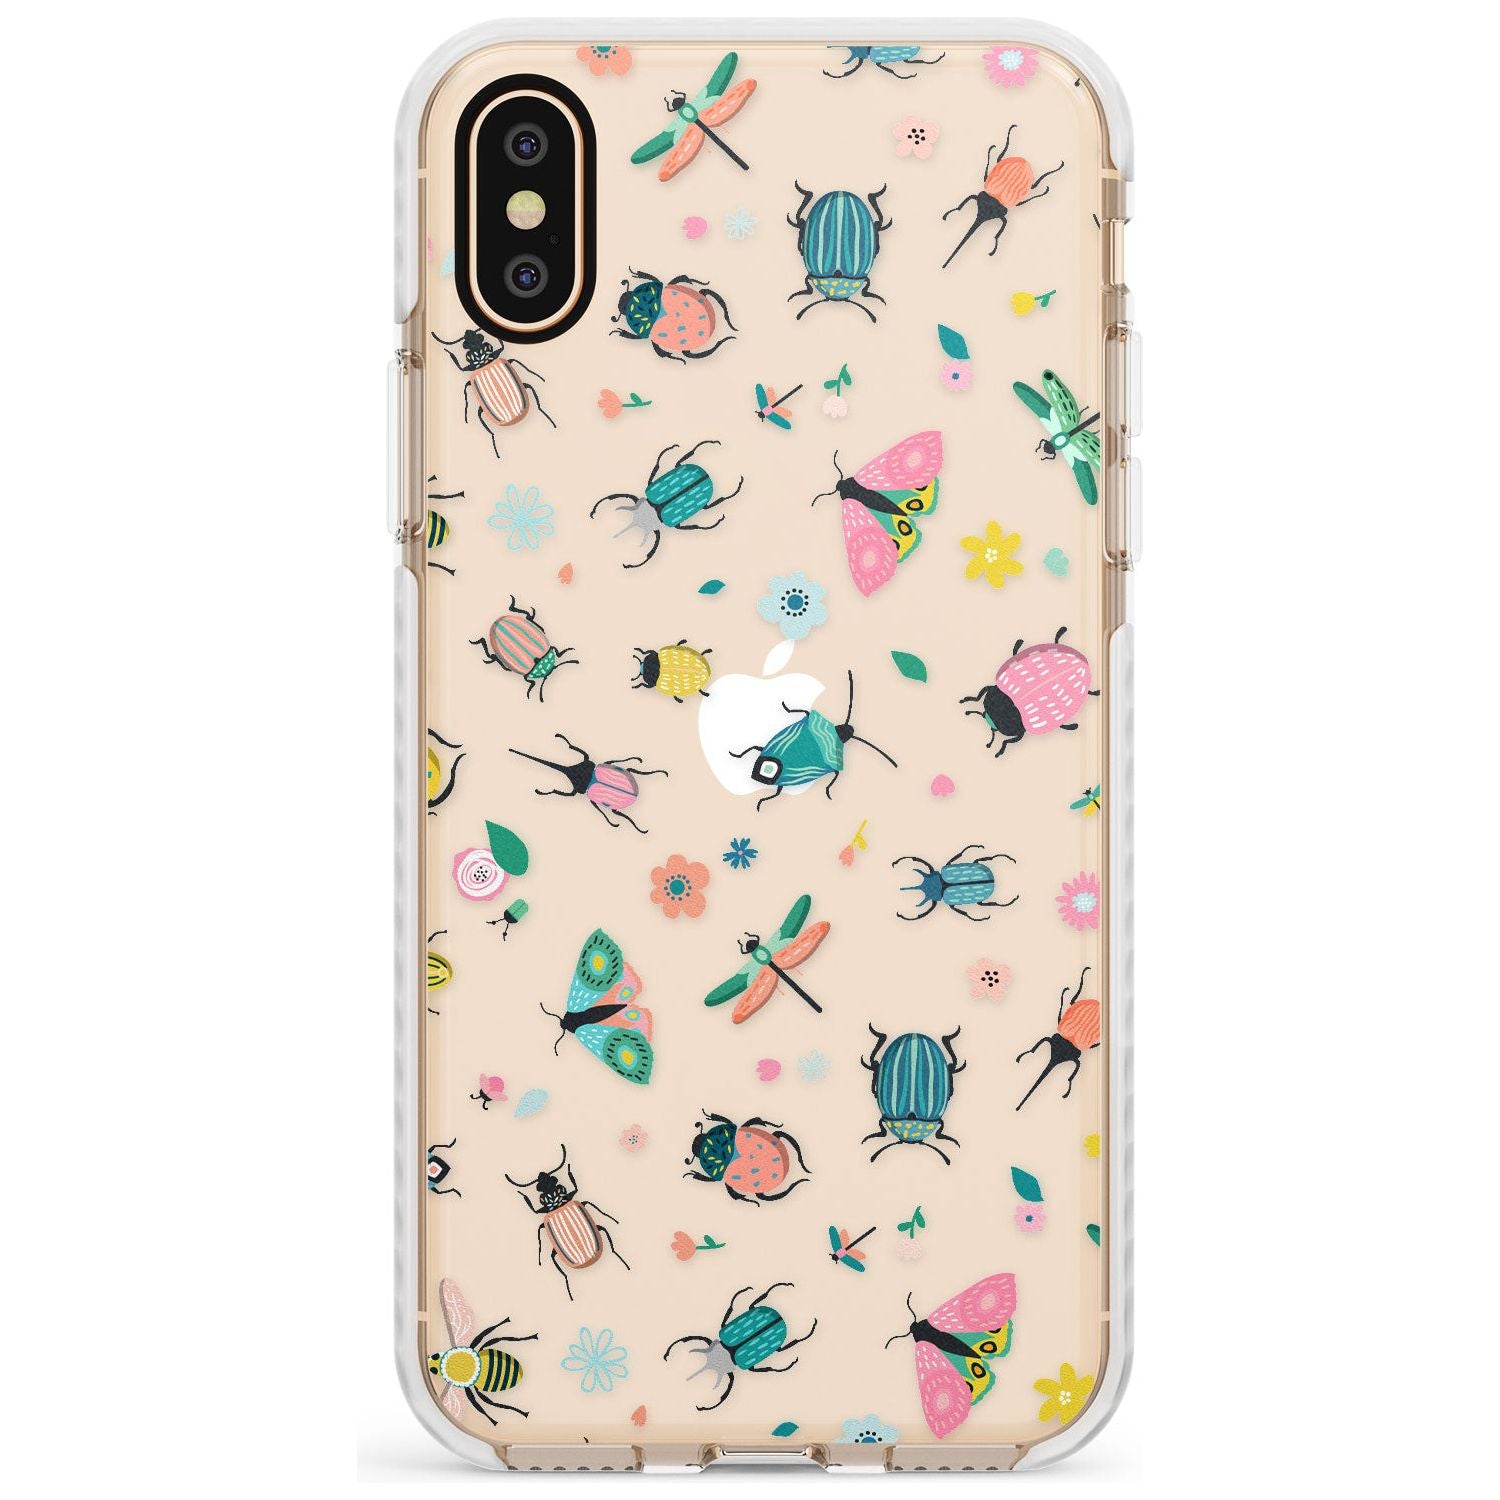 Spring Insects Slim TPU Phone Case Warehouse X XS Max XR